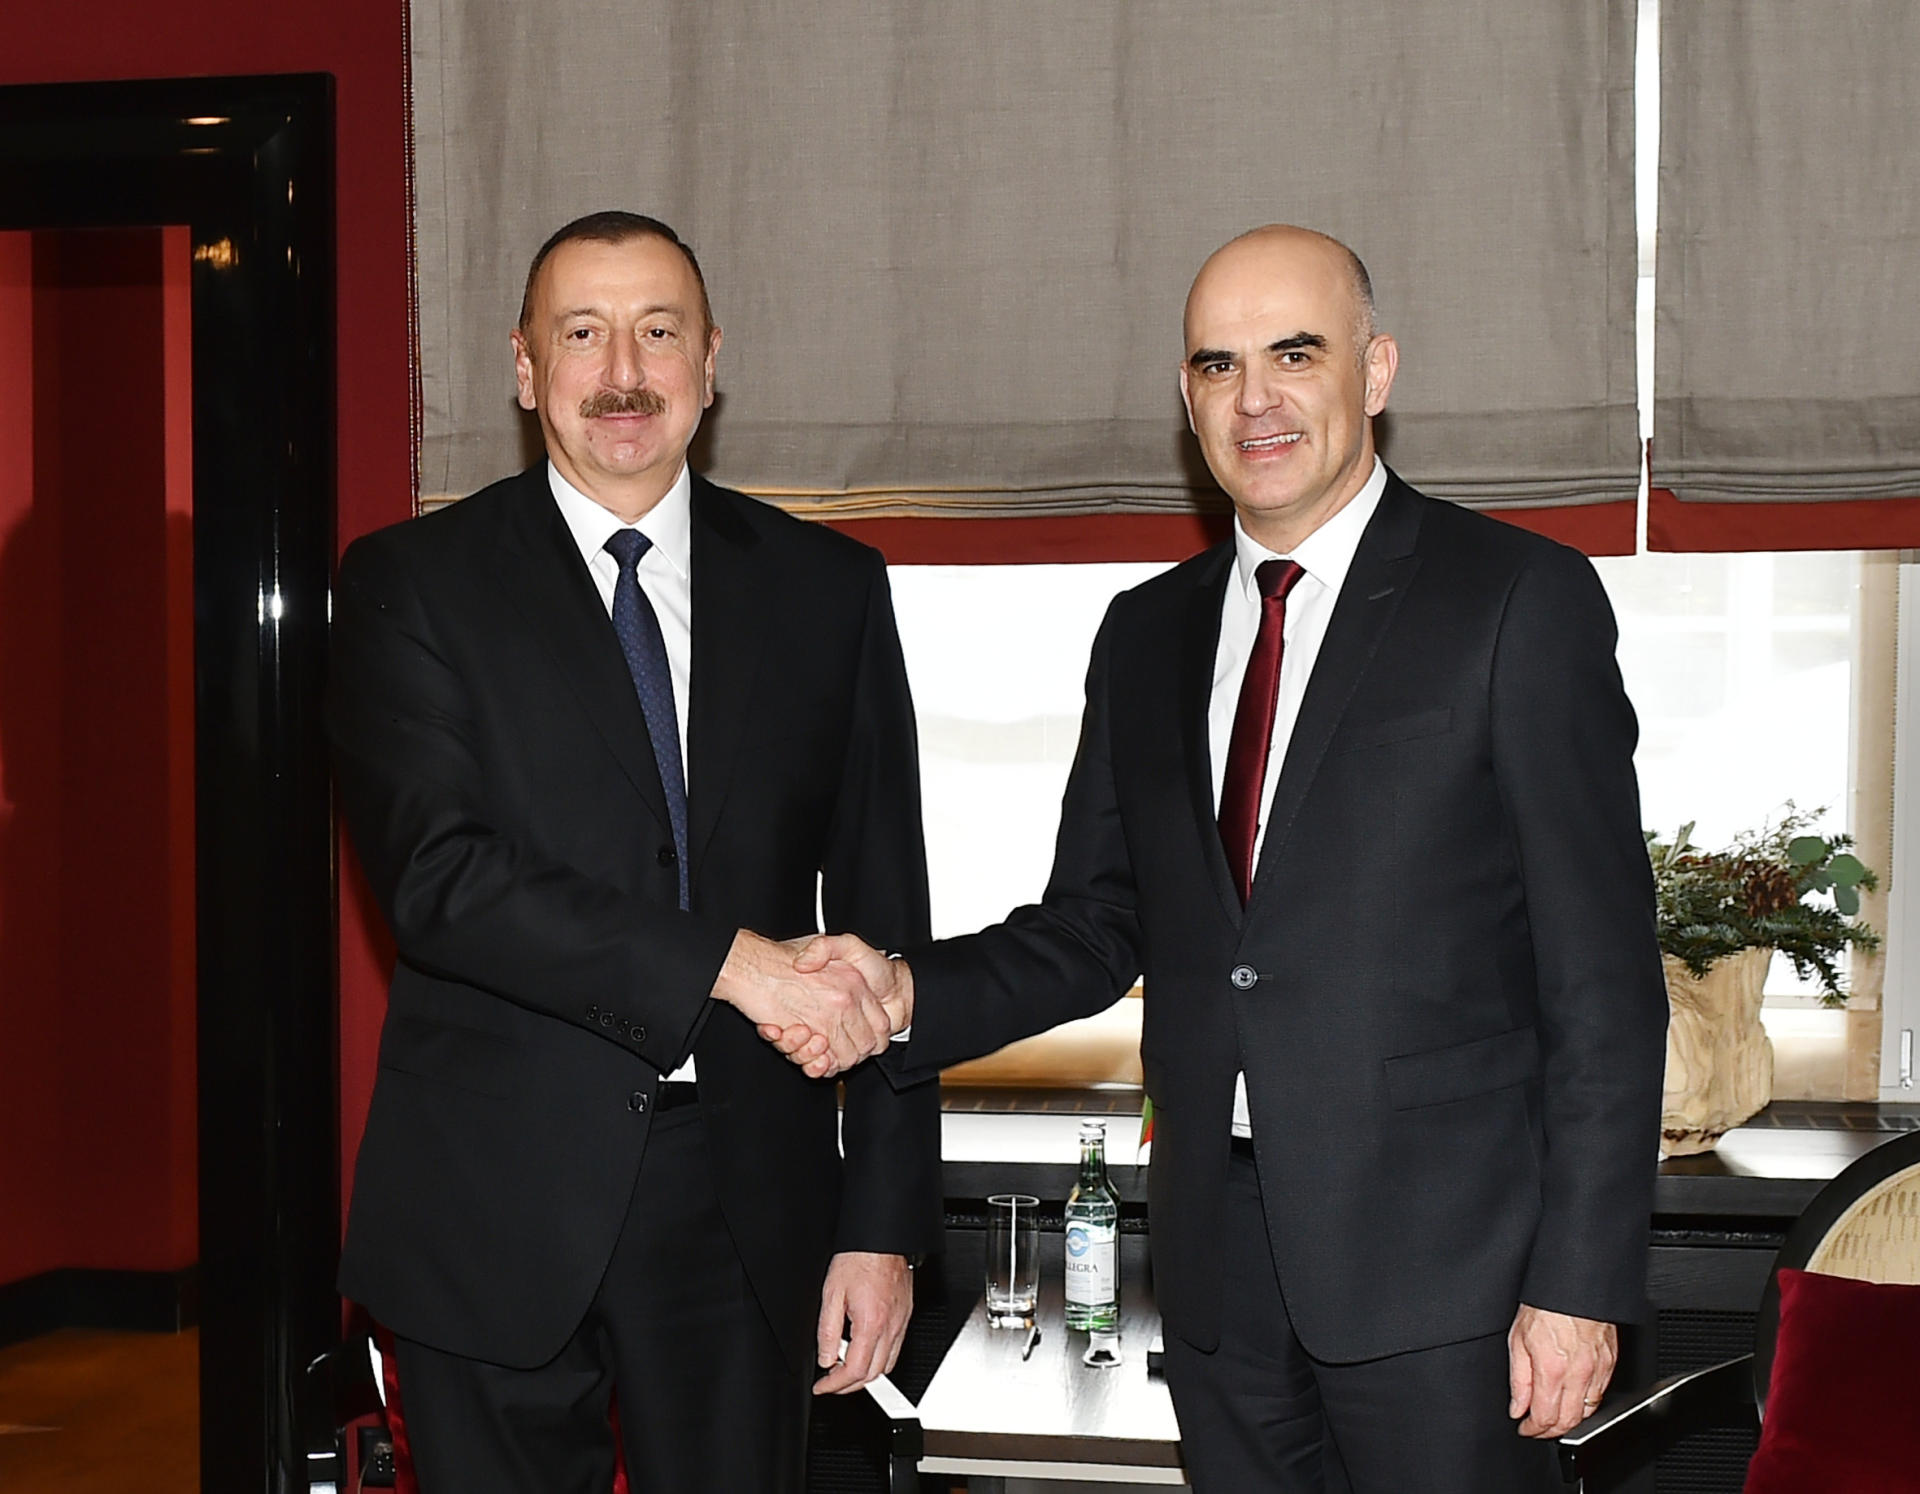 President Aliyev meets with Swiss president in Davos (PHOTO)